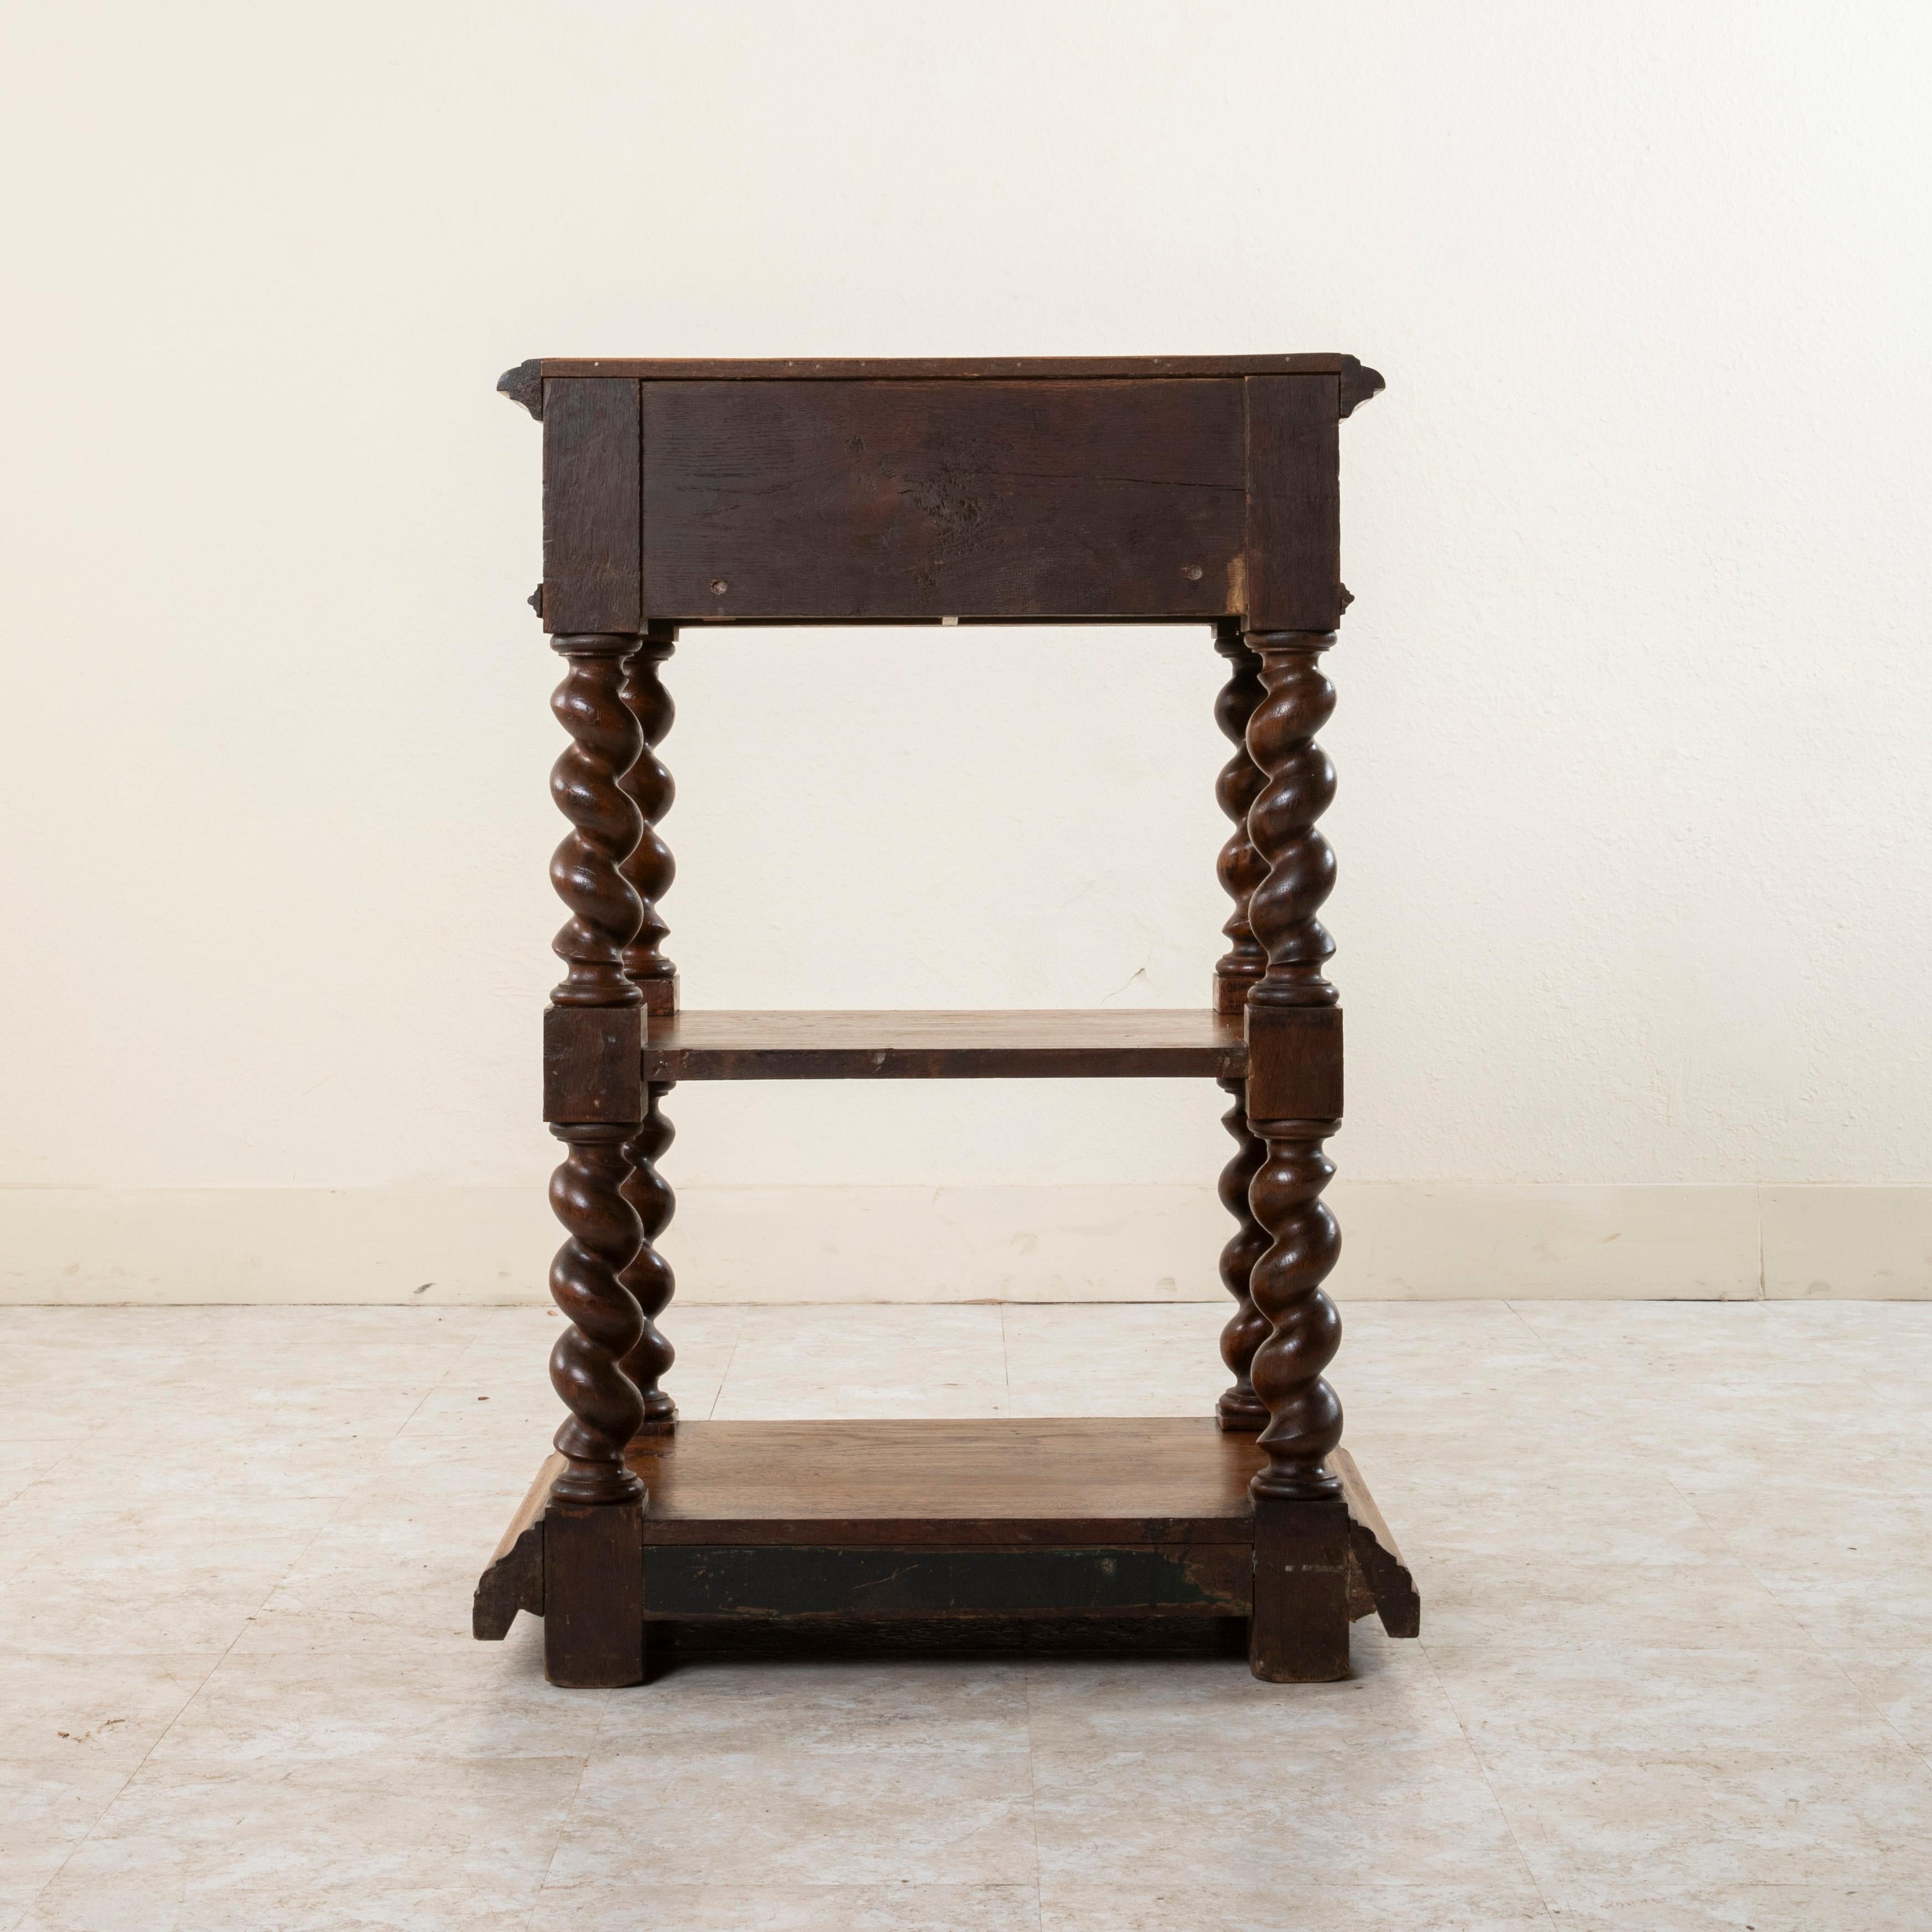 19th Century Small French Louis XIII Style Hand-Carved Oak Dessert Buffet, Console c. 1880